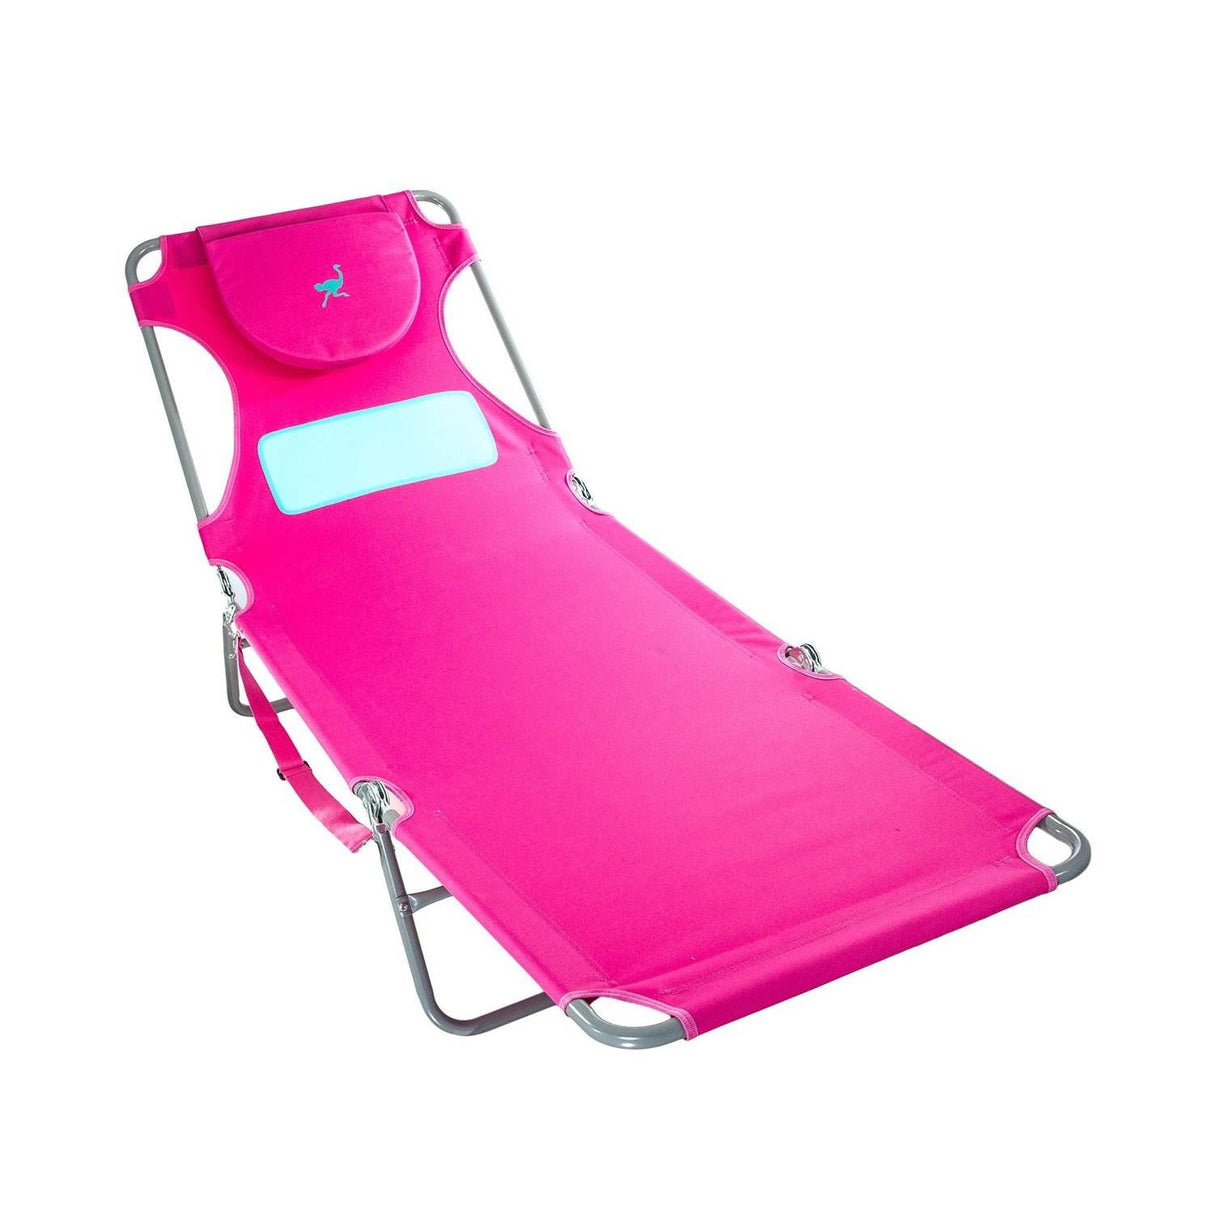 Ostrich Ladies Comfort Lounger, Portable Beach Camping Pool Tanning Chair, Pink